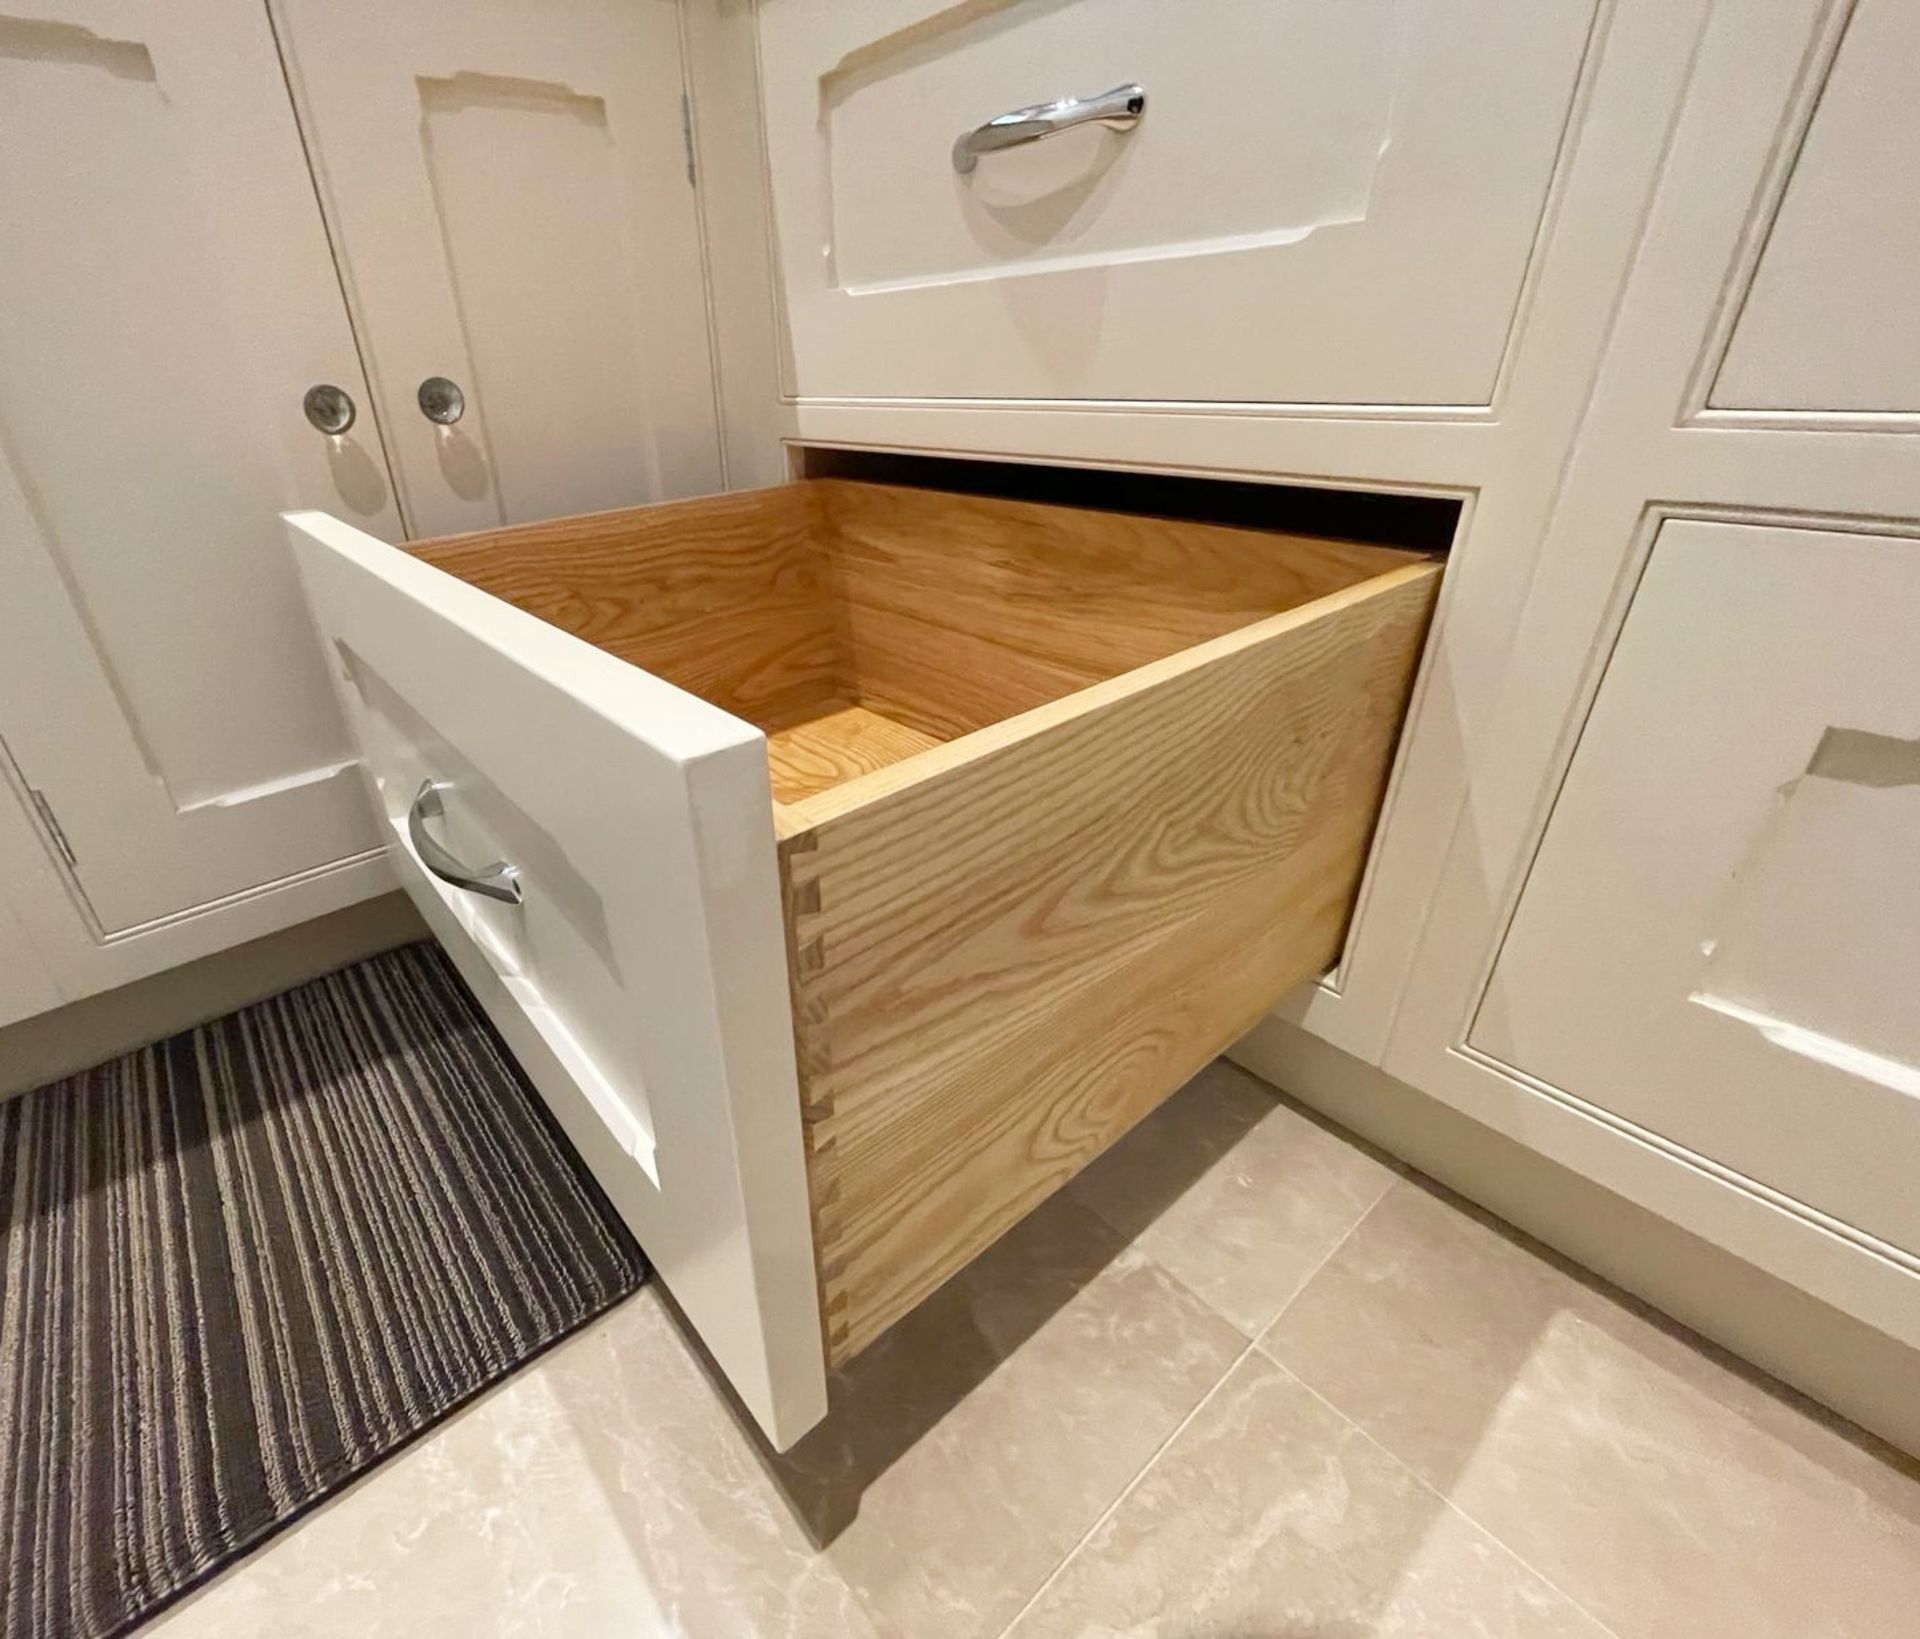 1 x Bespoke Fitted Solid Wood Kitchen with Natural Bianco Antico Grantite Work Surfaces - Image 39 of 61